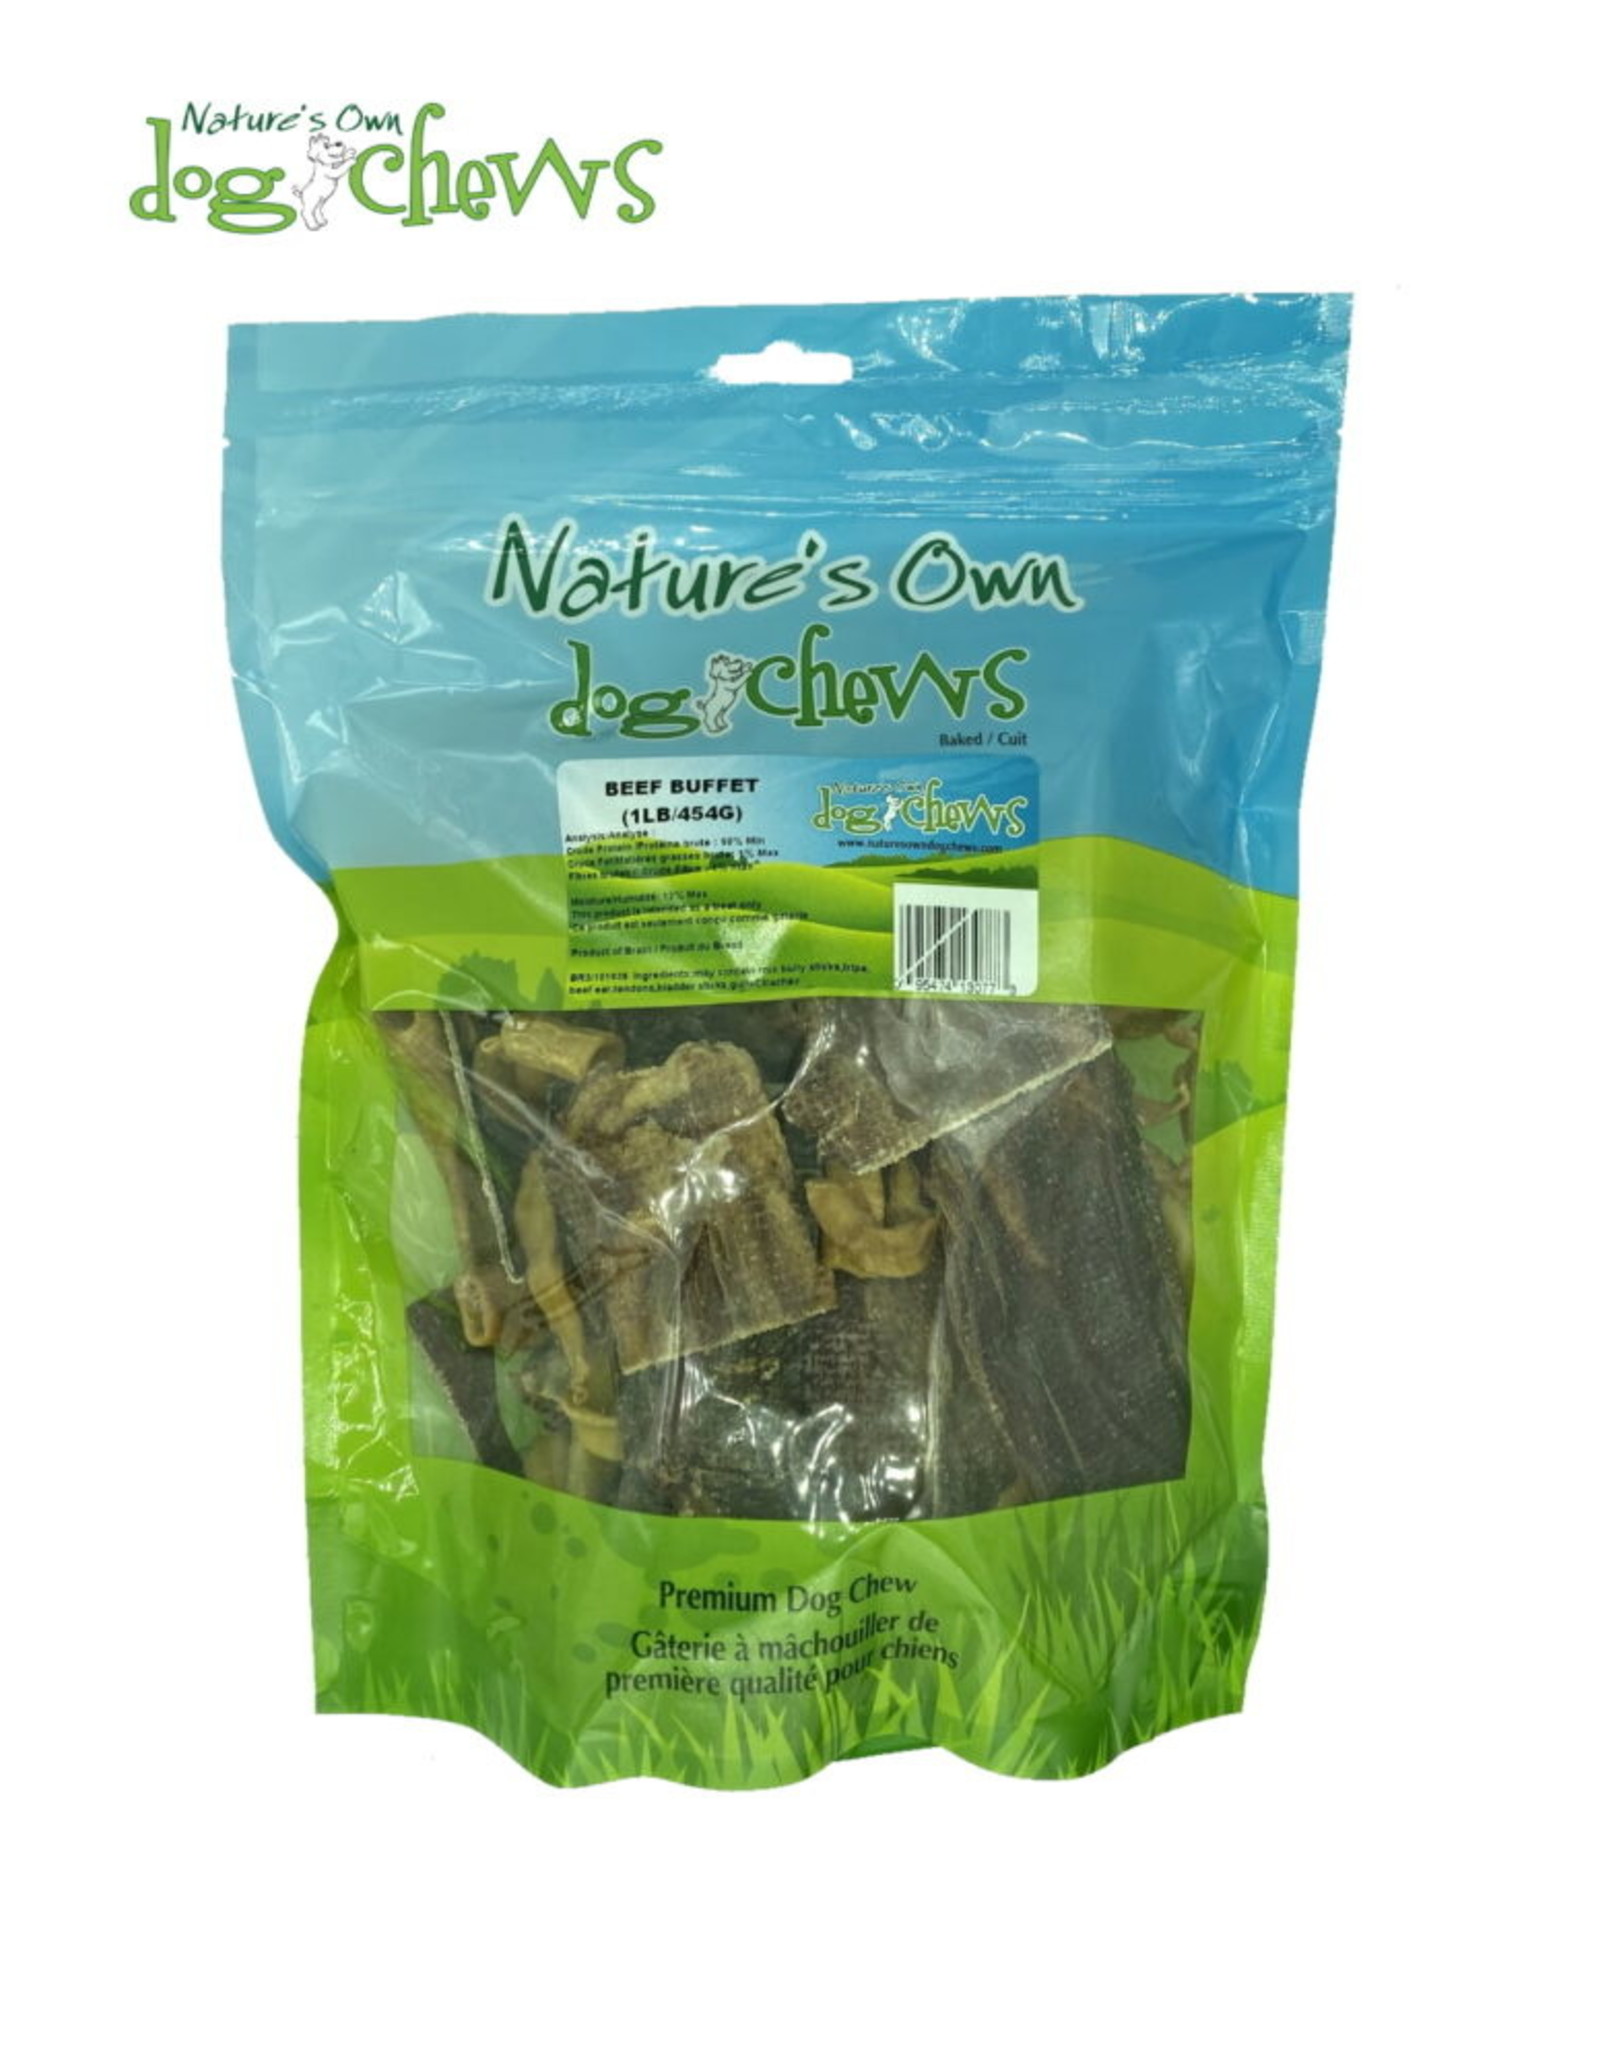 natures own dog chews Nature's Own Buffet Boeuf 16oz